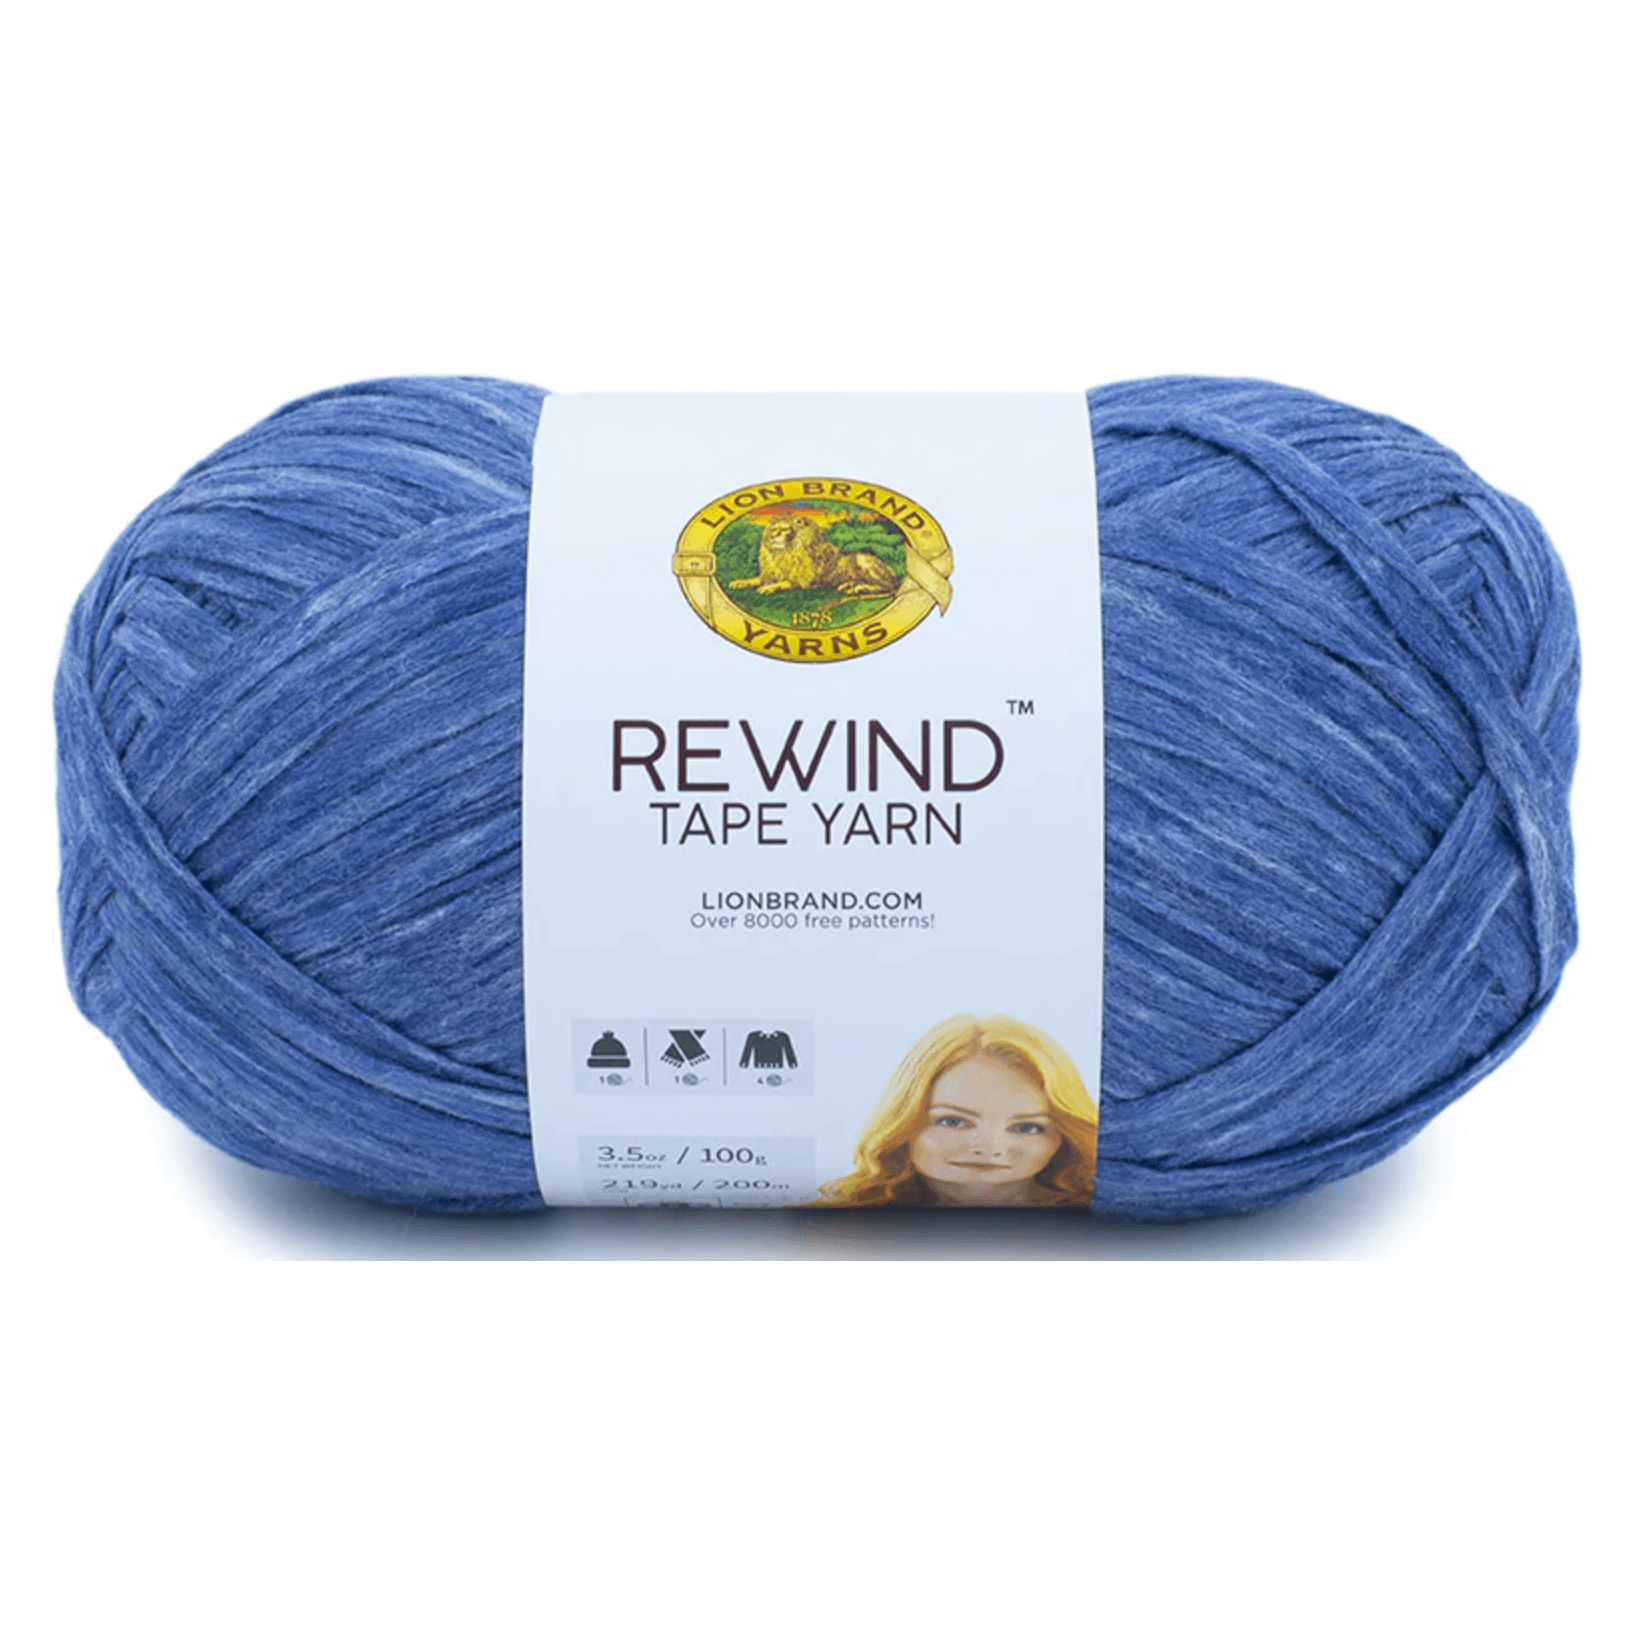 Lion Brand Yarn in Canada, Free Shipping at